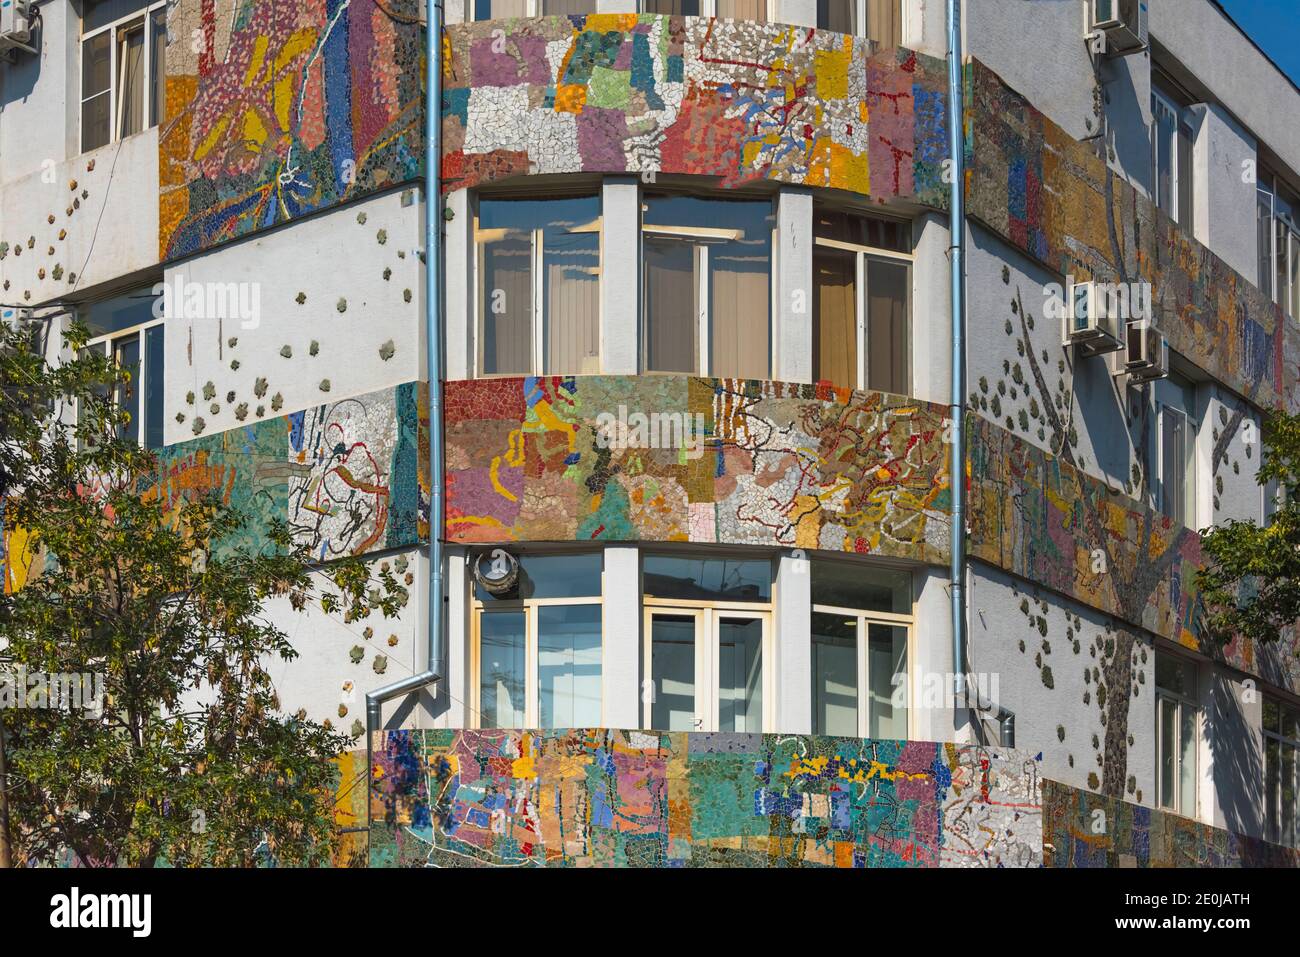 Building with colorful mural, Yerevan, Armenia Stock Photo